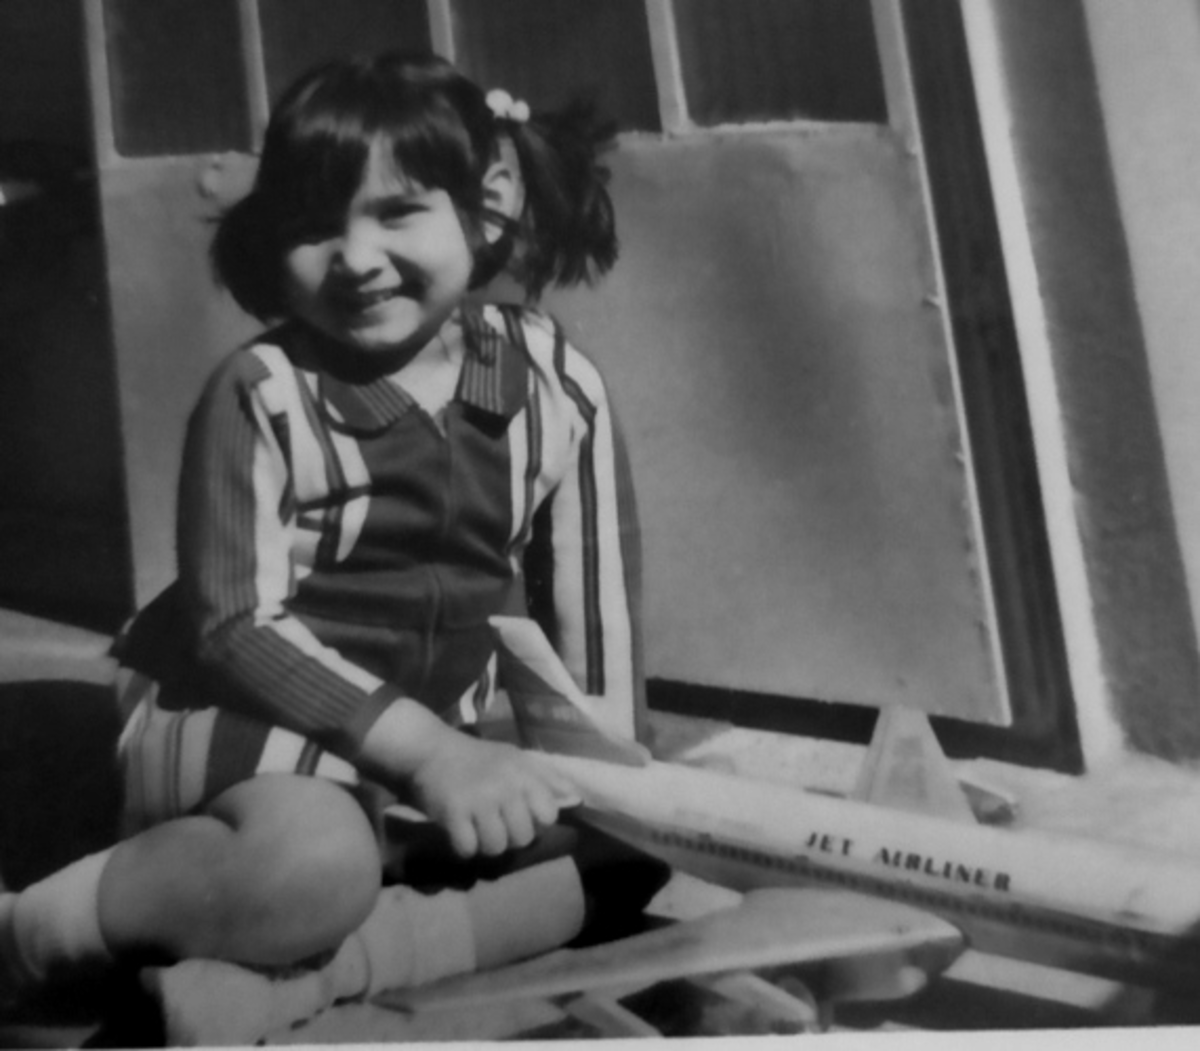 Pic2: Myself With My Spellbound Toy Airplane, Snapped by Dad